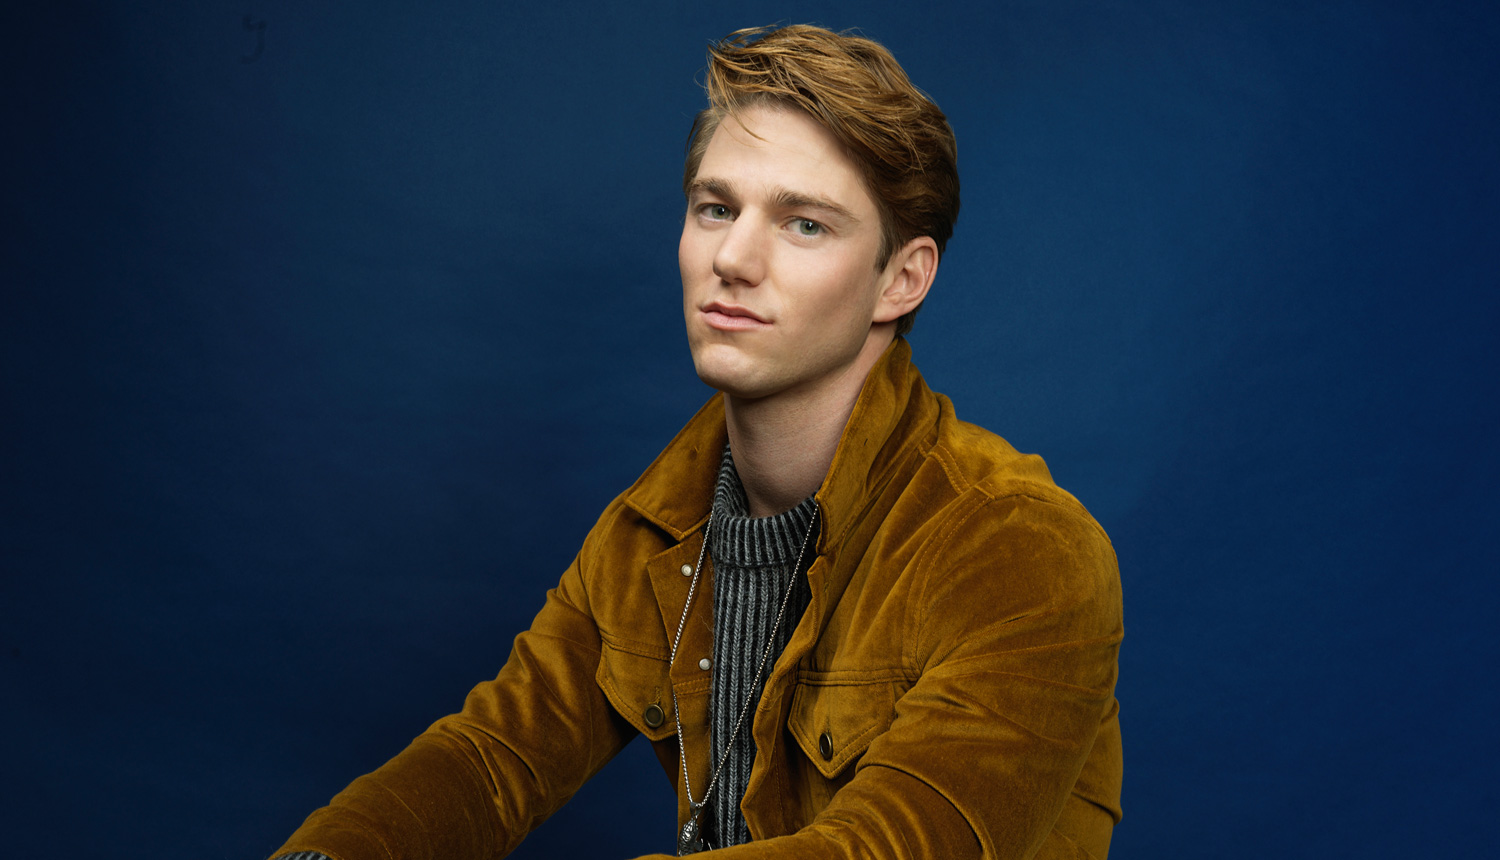 Meet ‘The Prom’ Actor Nico Greetham with These 10 Fun F...